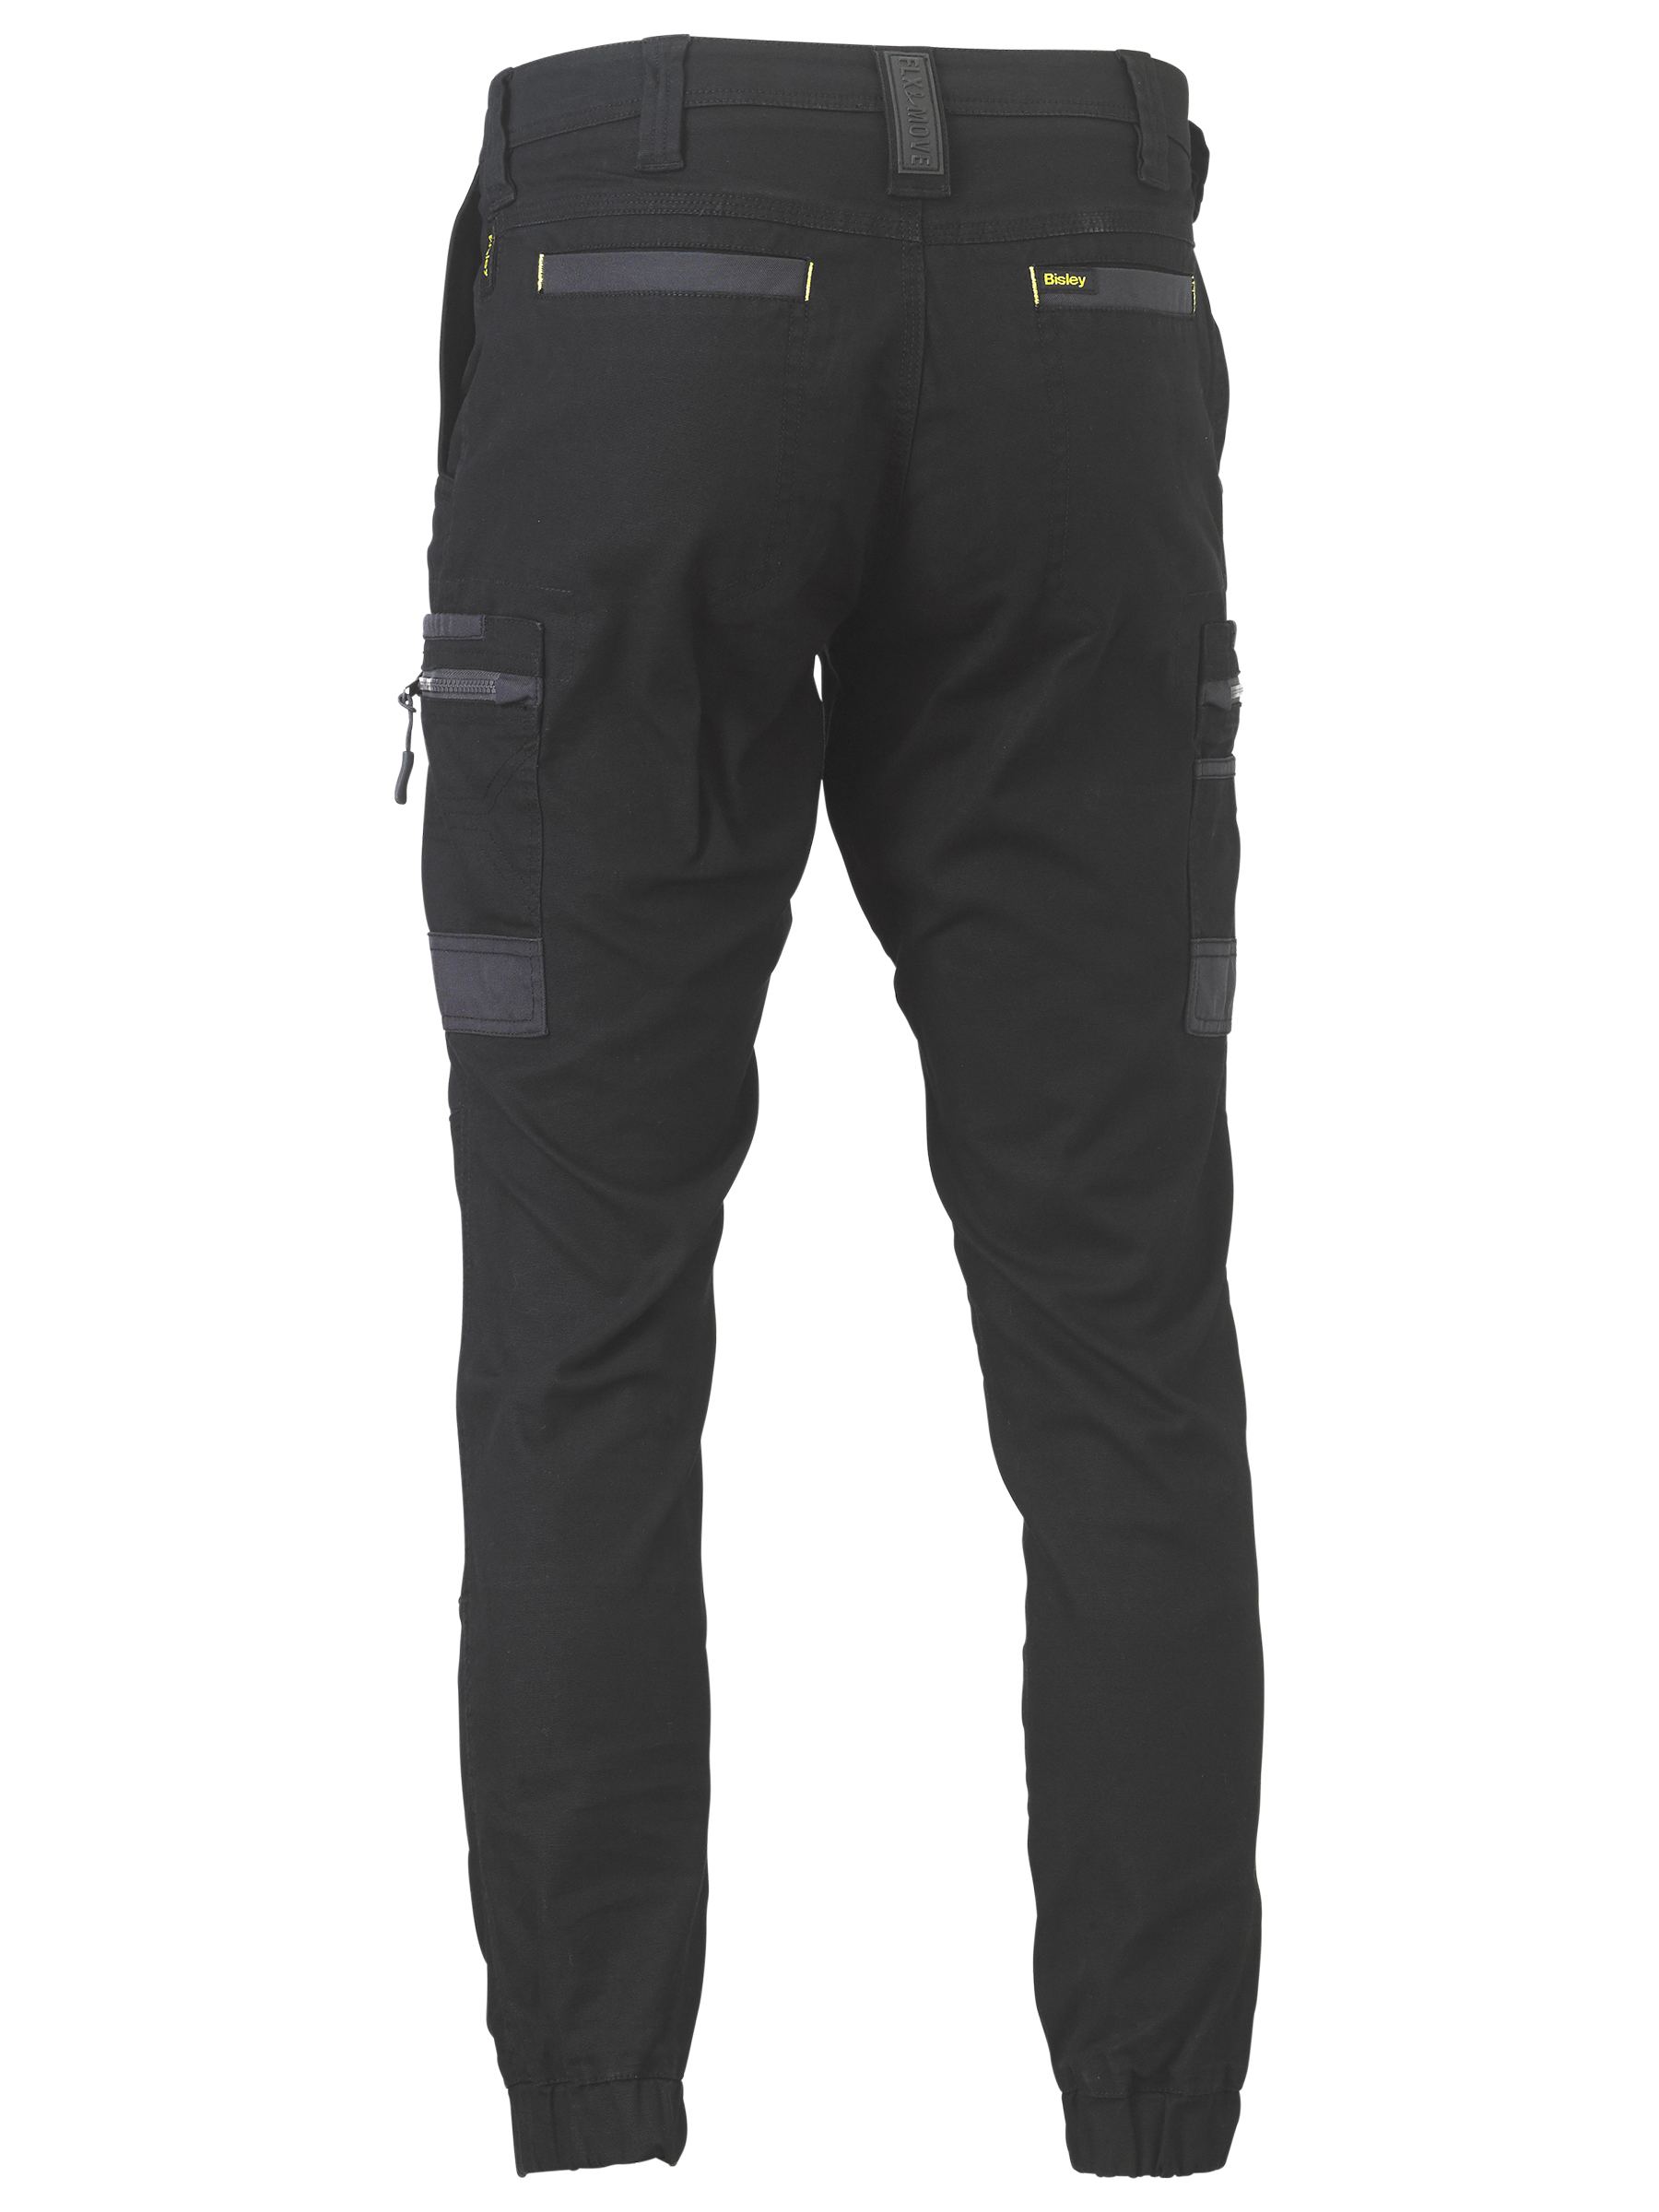 Flx and Move™ modern fit stretch cargo cuffed pants - BPC6334 - Bisley ...